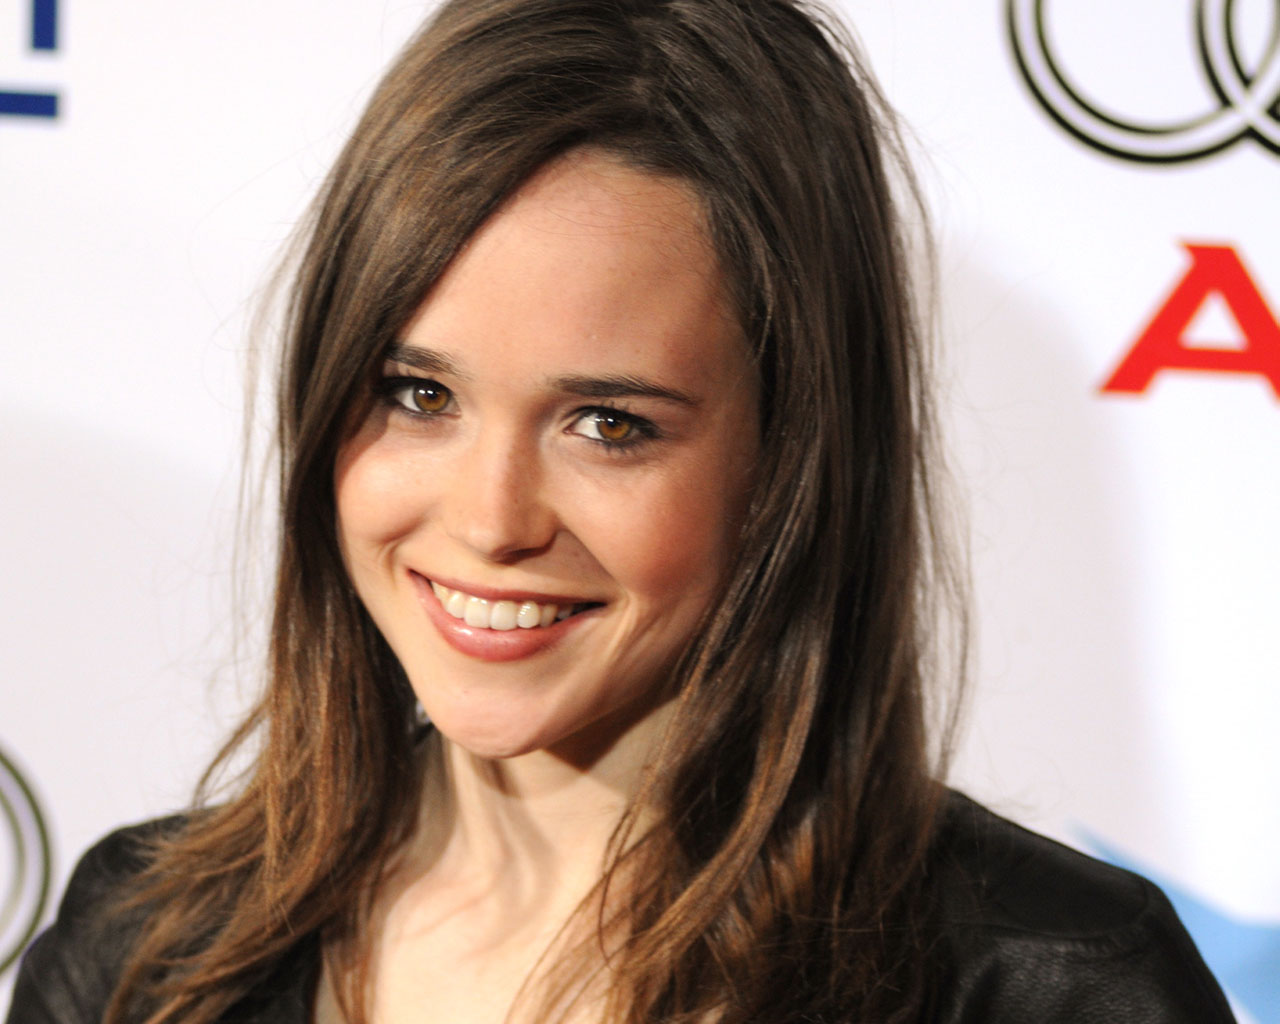 Past Oscar nominee Ellen Page made headlines Friday night. She revealed in a speech in front of an LGBT group that she's gay. It's probably not a shock to a ...